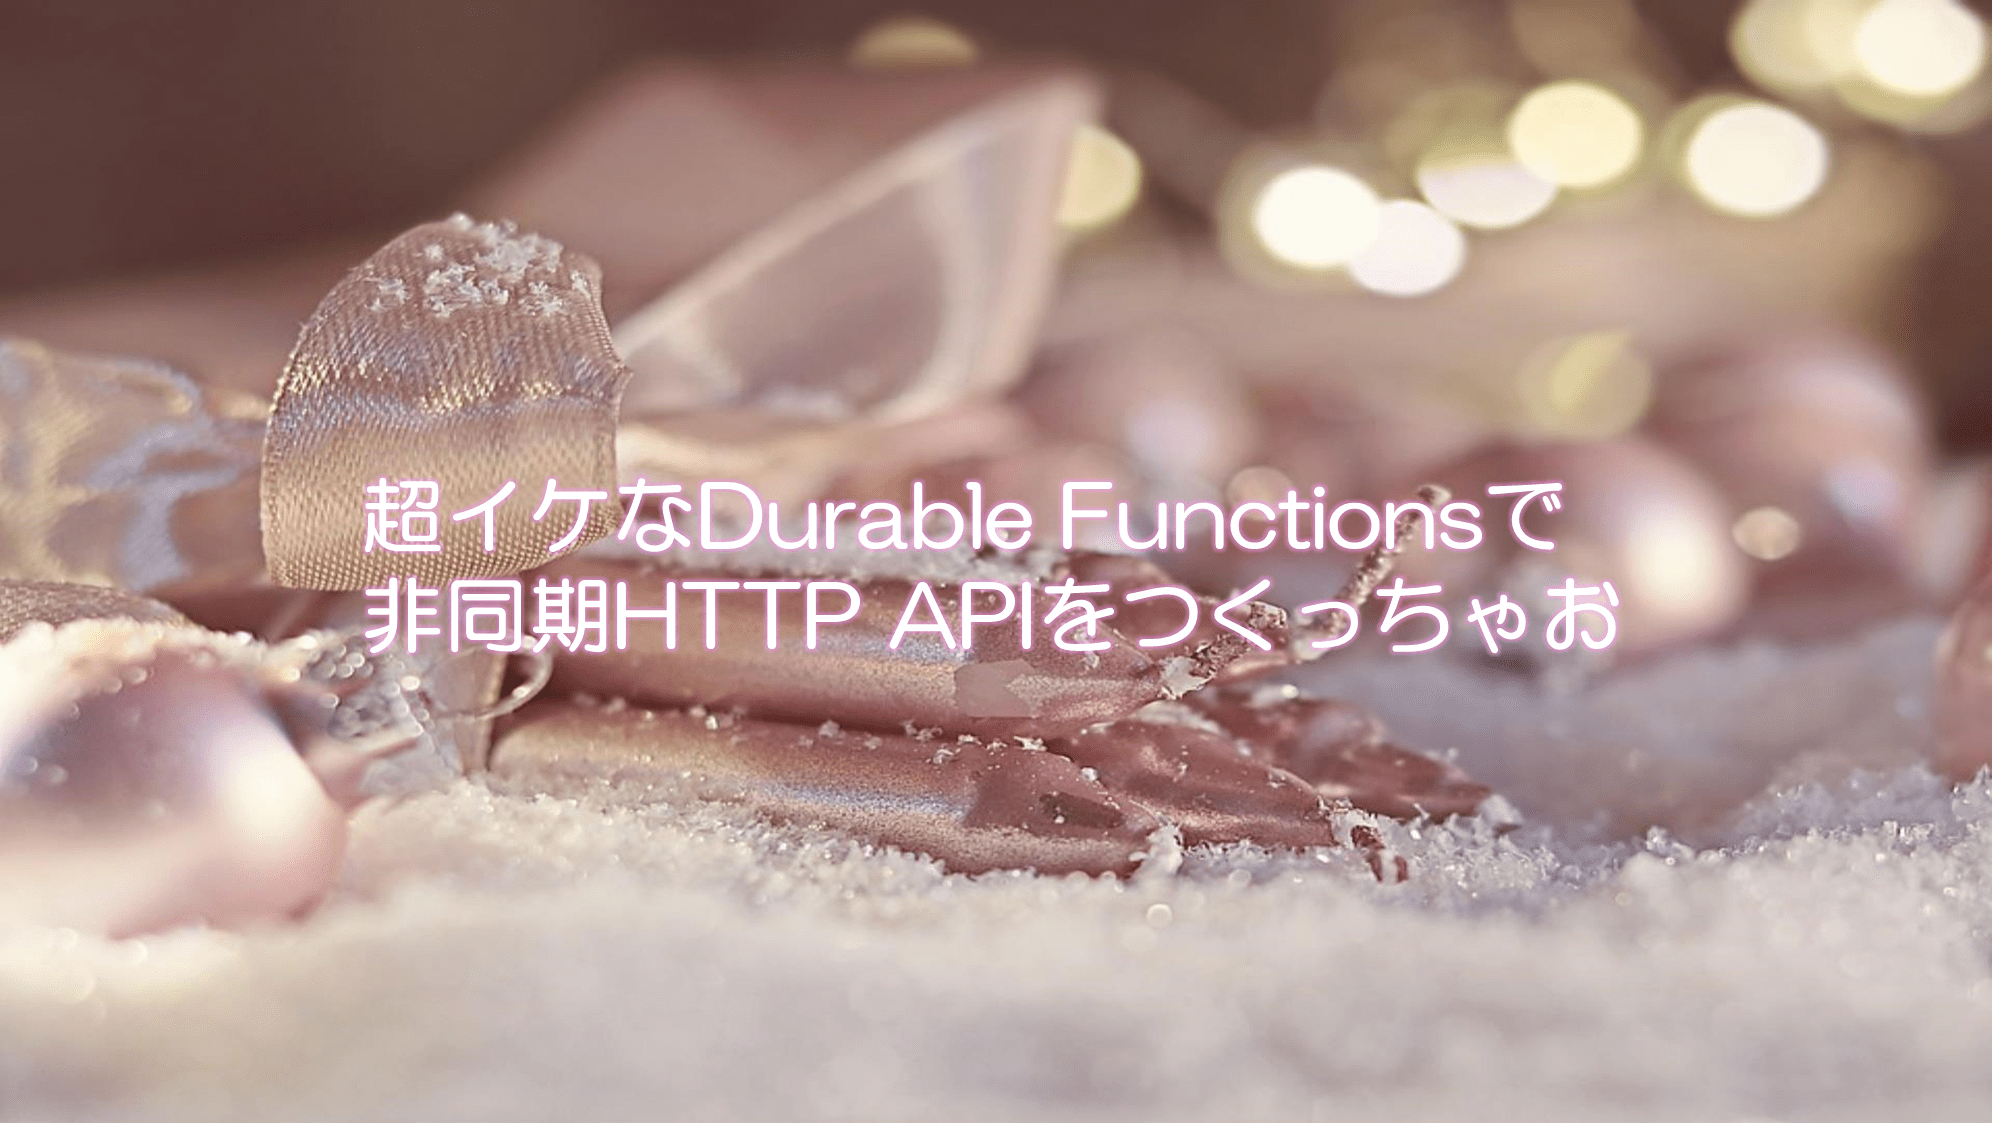 azblob://2022/11/24/eyecatch/2022-12-03-async-http-api-durable-functions-000.png